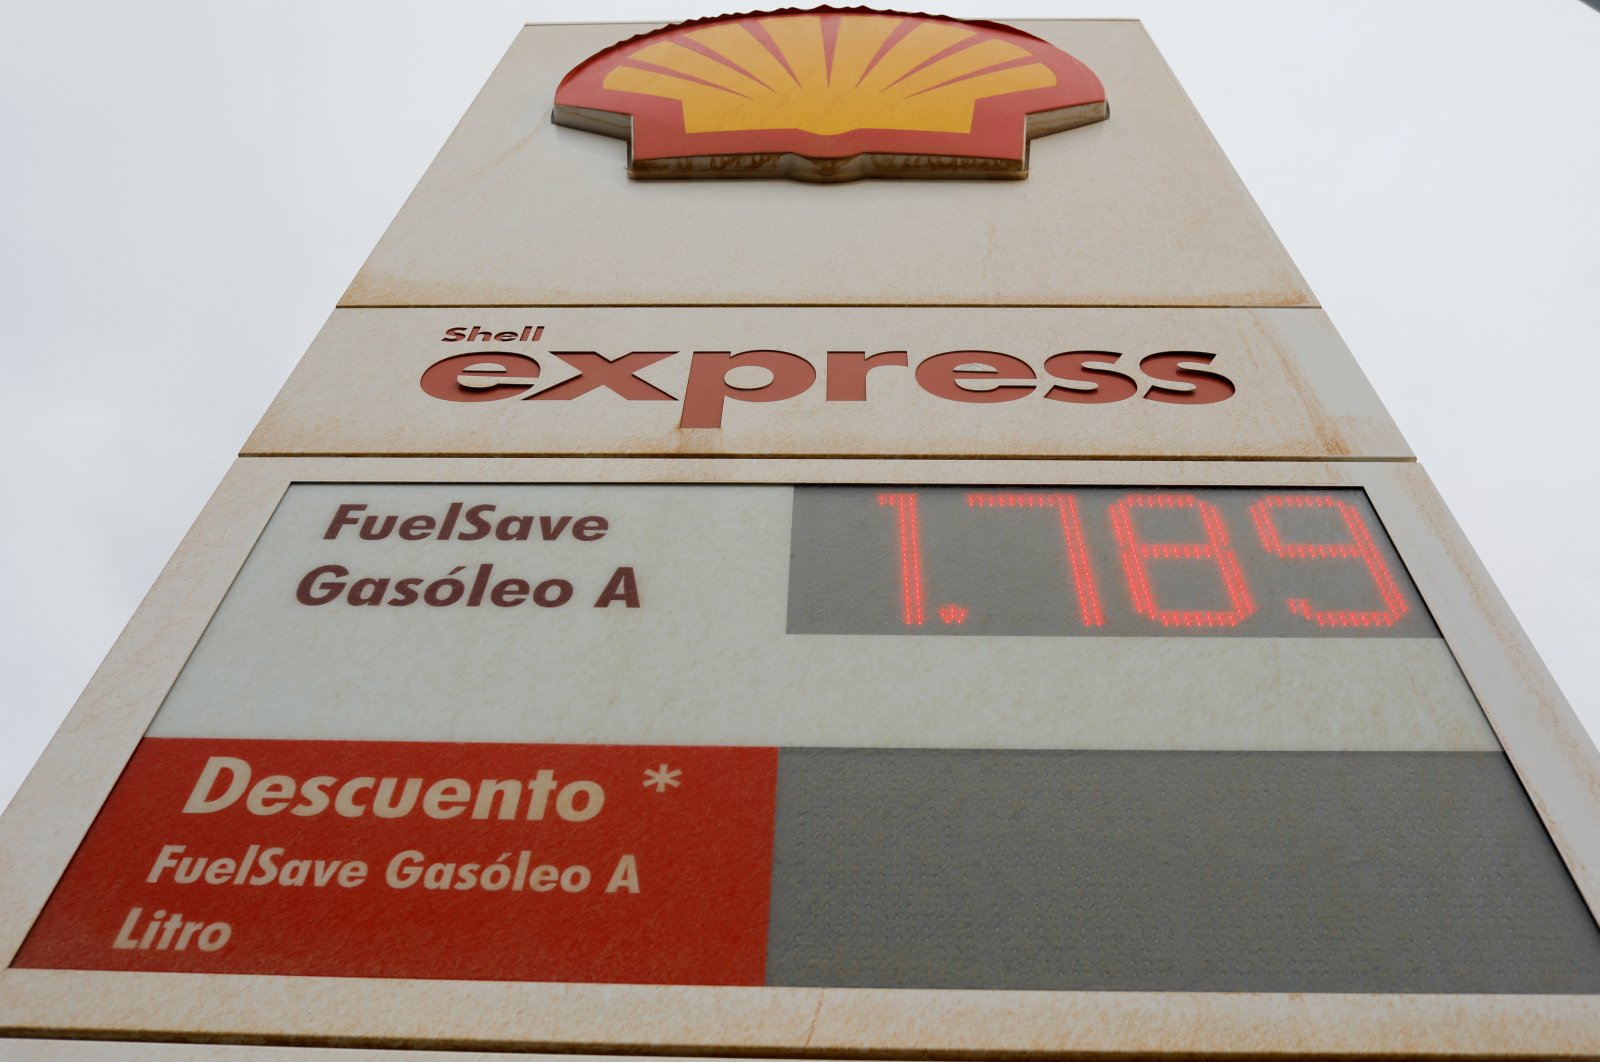 Fuel prices are seen at a Shell Express petrol station in Ronda, Spain, March 28, 2022. (Reuters Photo)